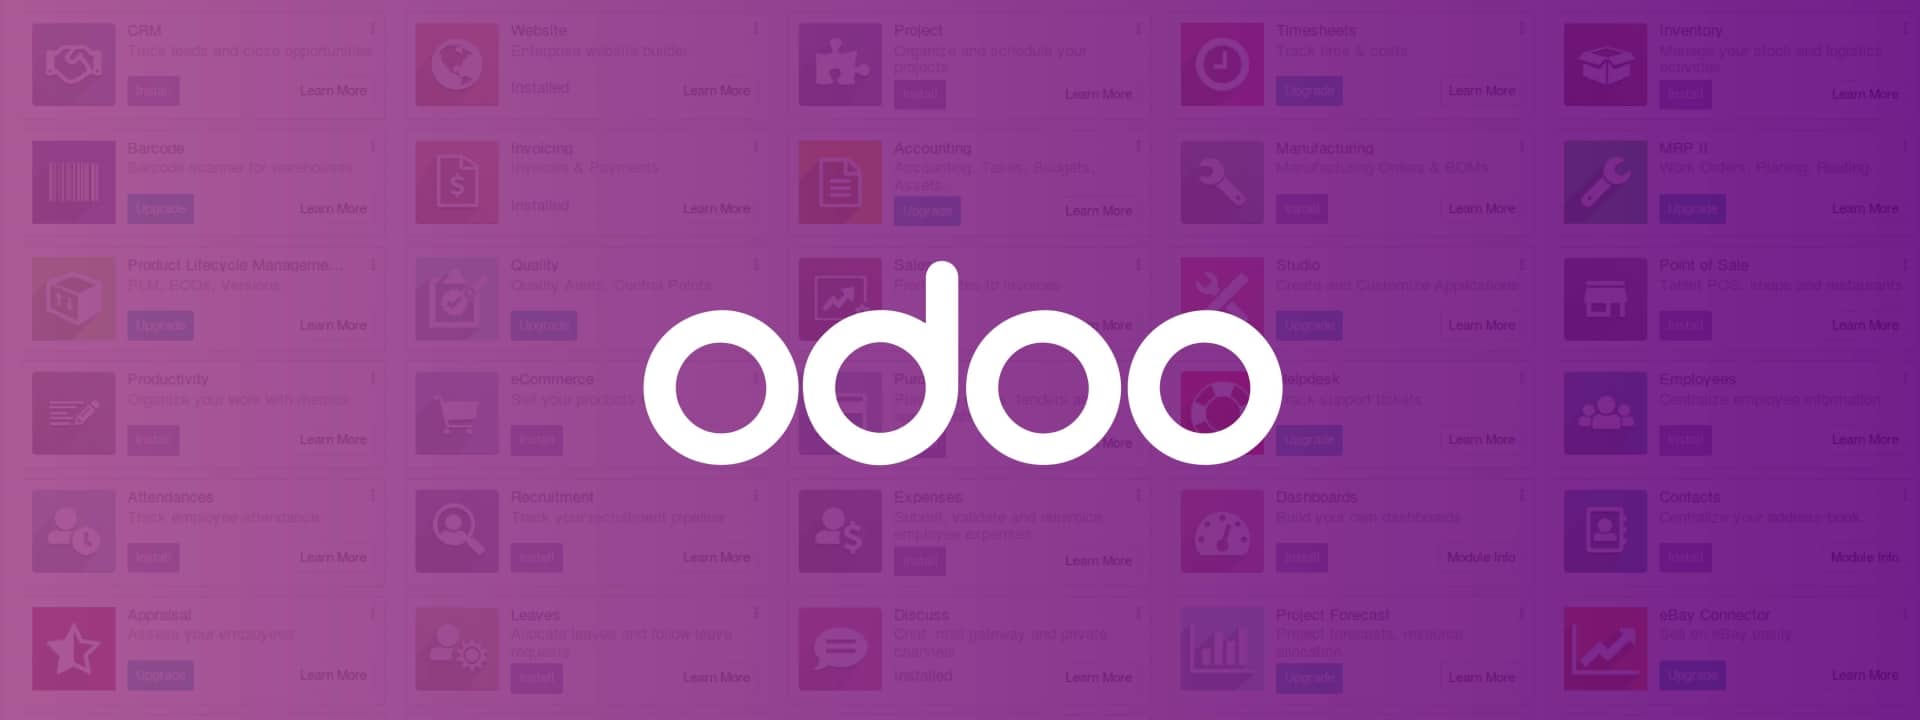 Odoo Open Source ERP: An Introduction | Velocity Host